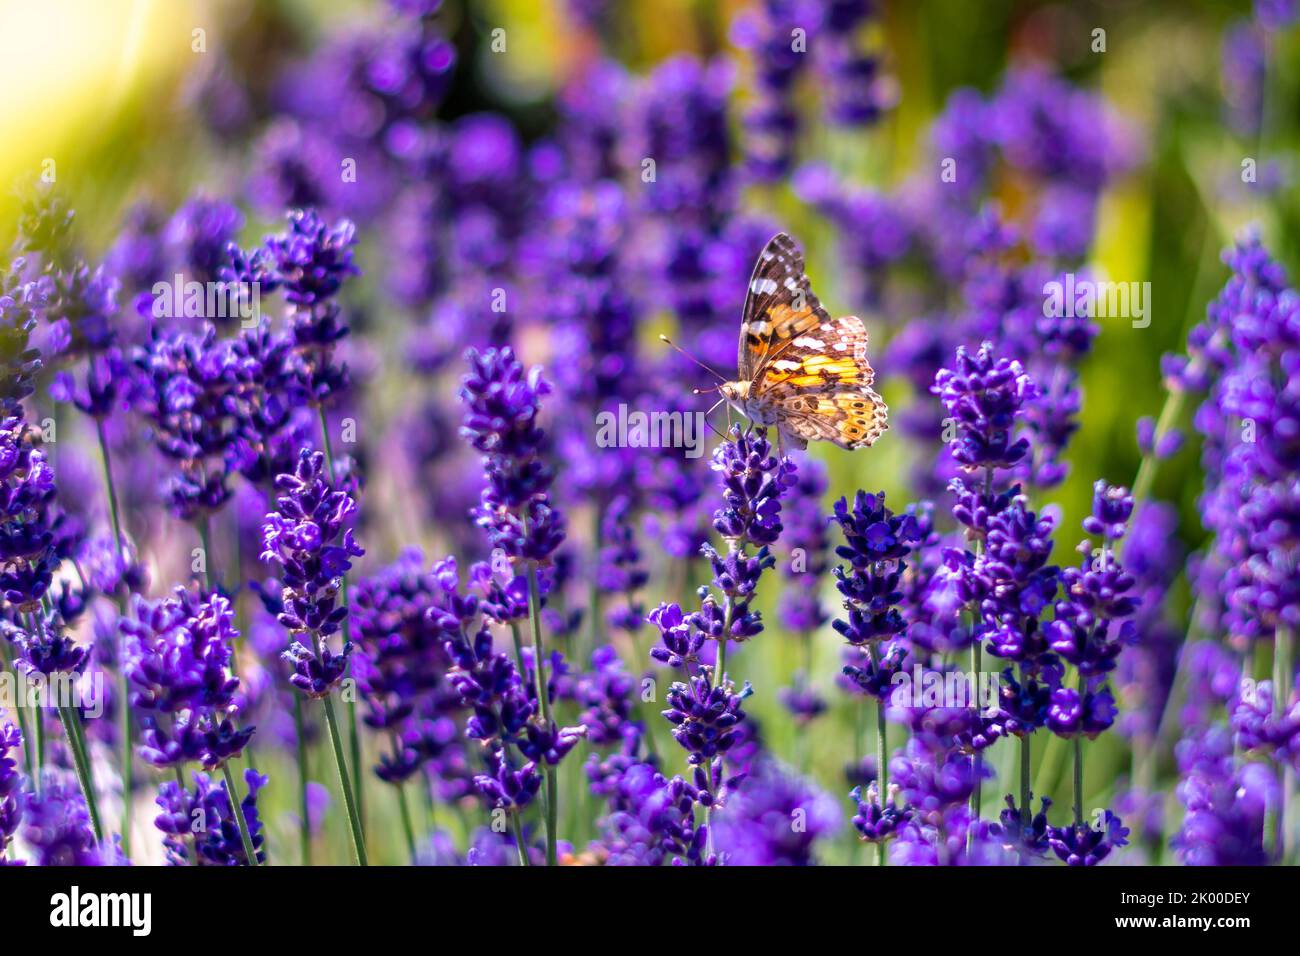 Orange butterfly (Vanessa Cardui) and bee on the lavender flower. Purple aromathic blossom with insect animals. Summer weather, vibrant colors. Ecolog Stock Photo